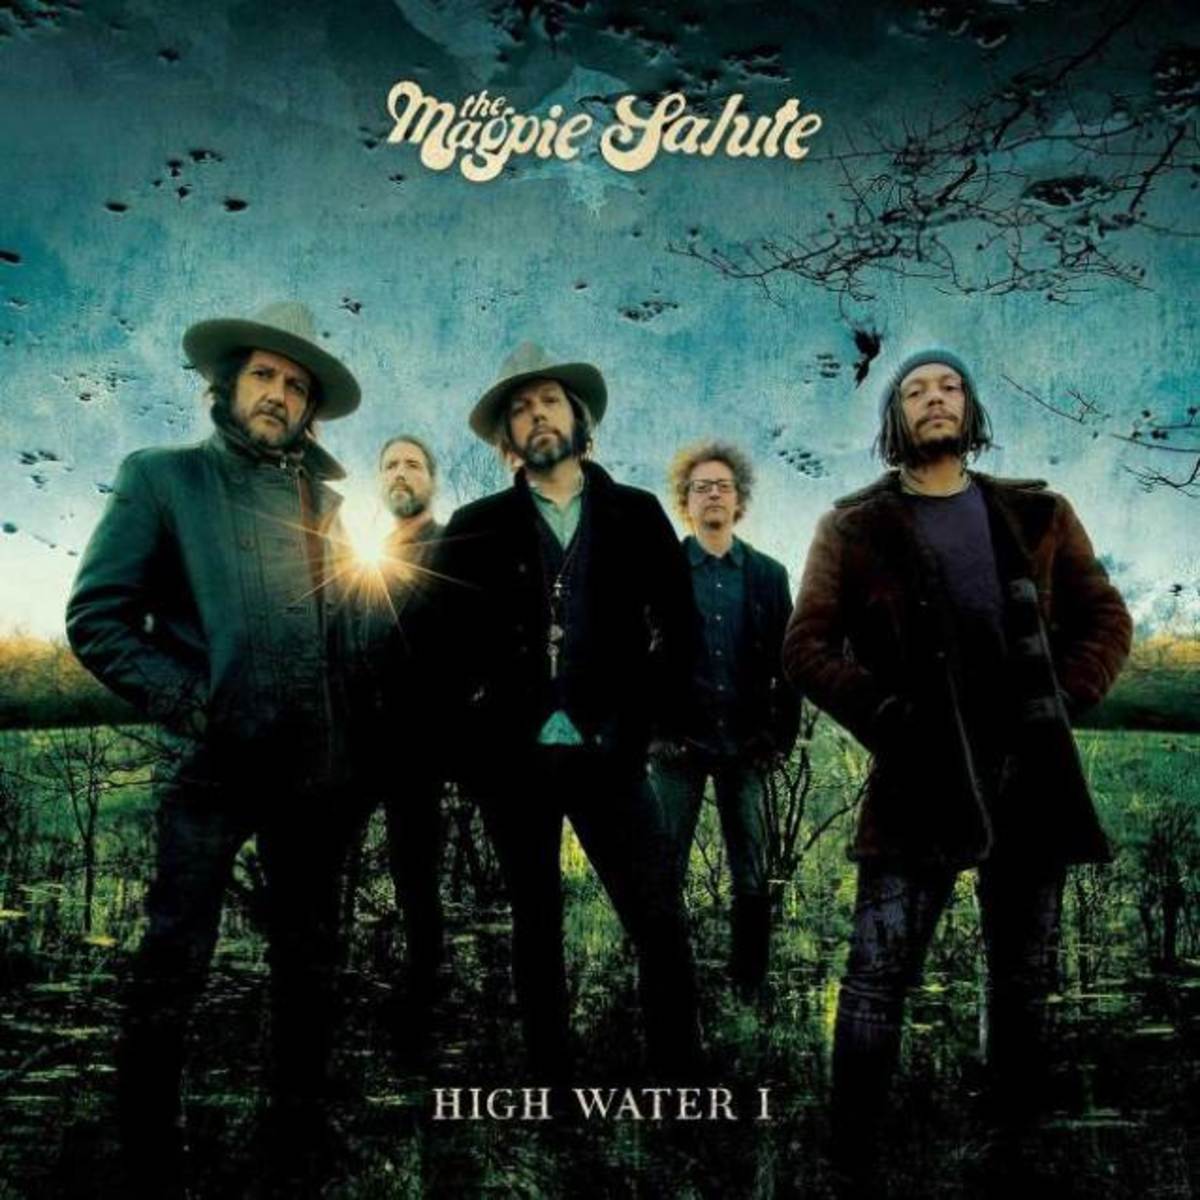 THE MAGPIE SALUTE – High Water I